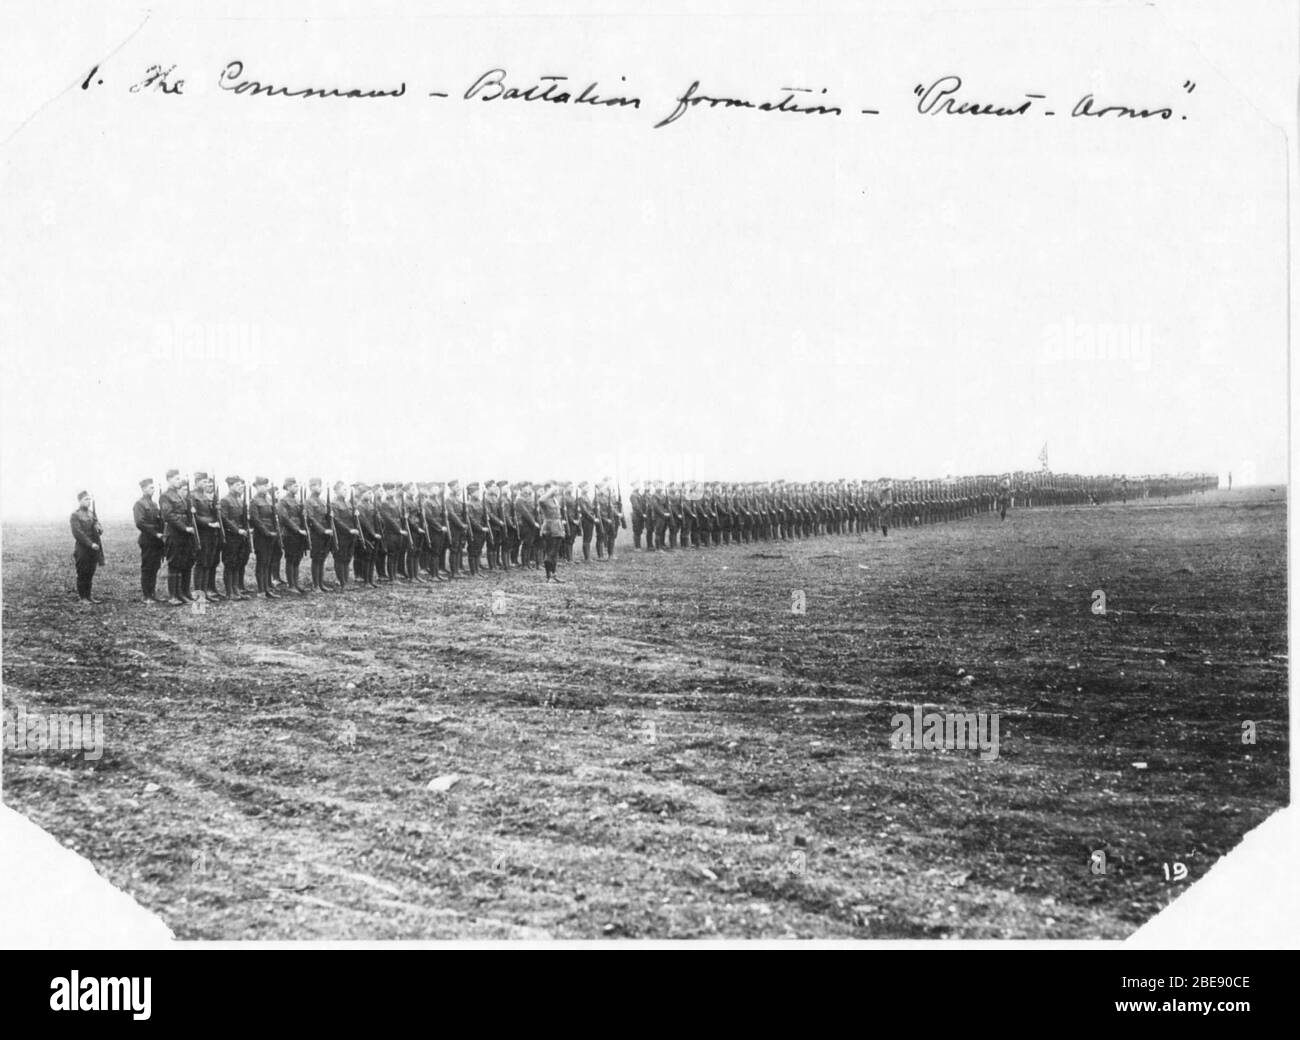 "Englisch: 7th AIC - Formation; 1918; Air Service, United States Army Photograph, Gorrells Geschichte des American Expeditionary Forces Air Service, Series J Training, Volume 7, Histories of the 1st (Paris), 2d (Tours), 4th (D'Avord), 7th (Clermont-Ferrand) und 8th (Foggia, Italy) Aviation Instructional Centers über http://www.fold3.com; Luftdienst, Foto der United States Army; ' Stockfoto